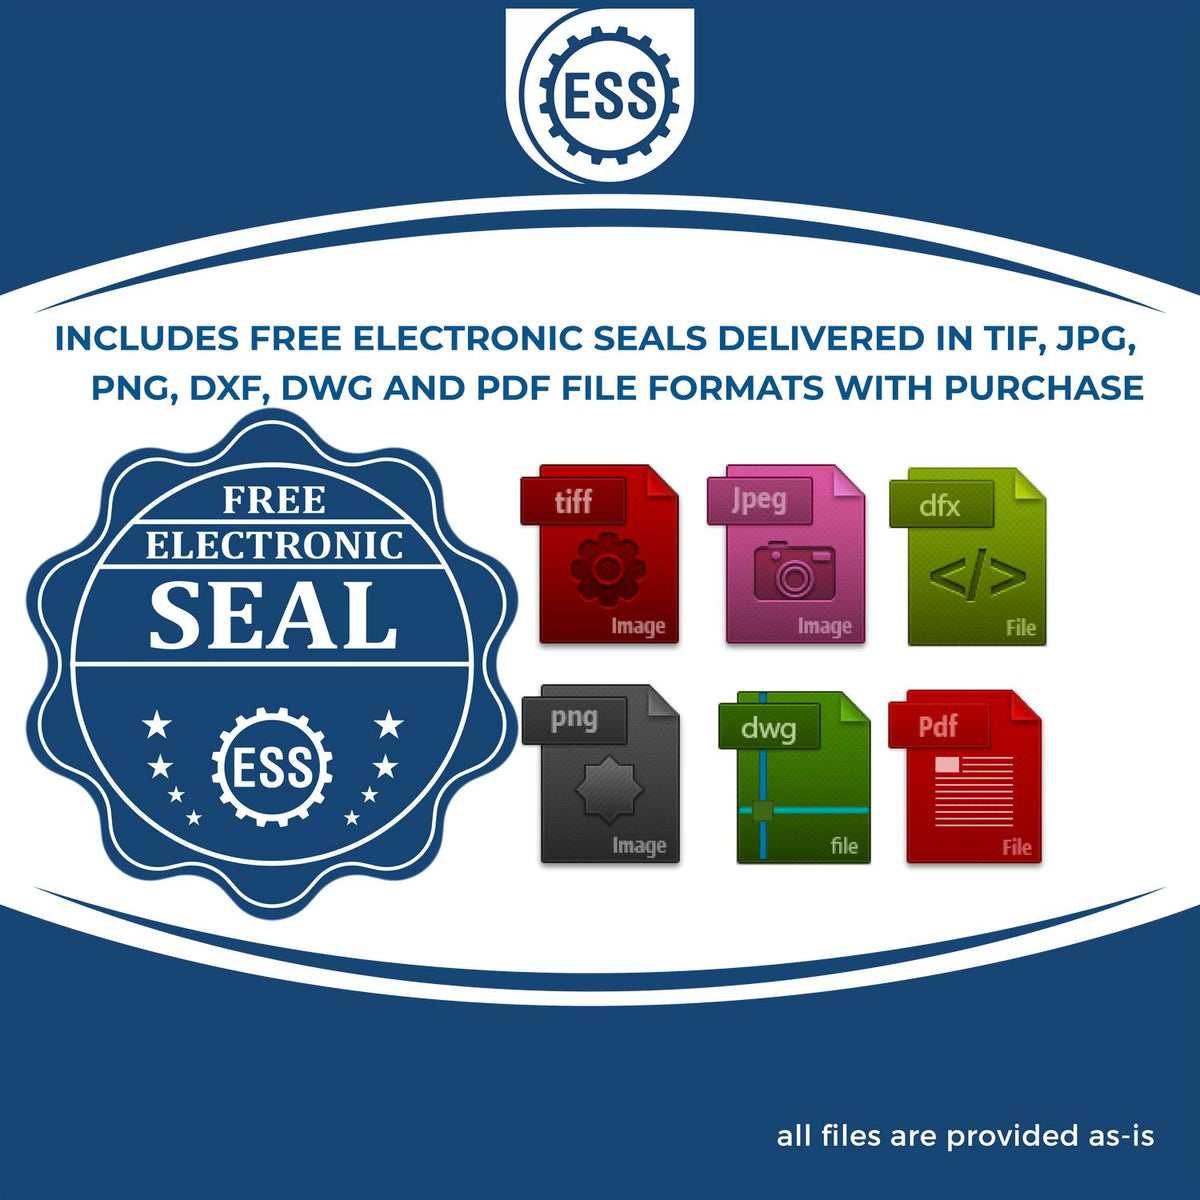 An infographic for the free electronic seal for the Soft Nevada Professional Engineer Seal illustrating the different file type icons such as DXF, DWG, TIF, JPG and PNG.